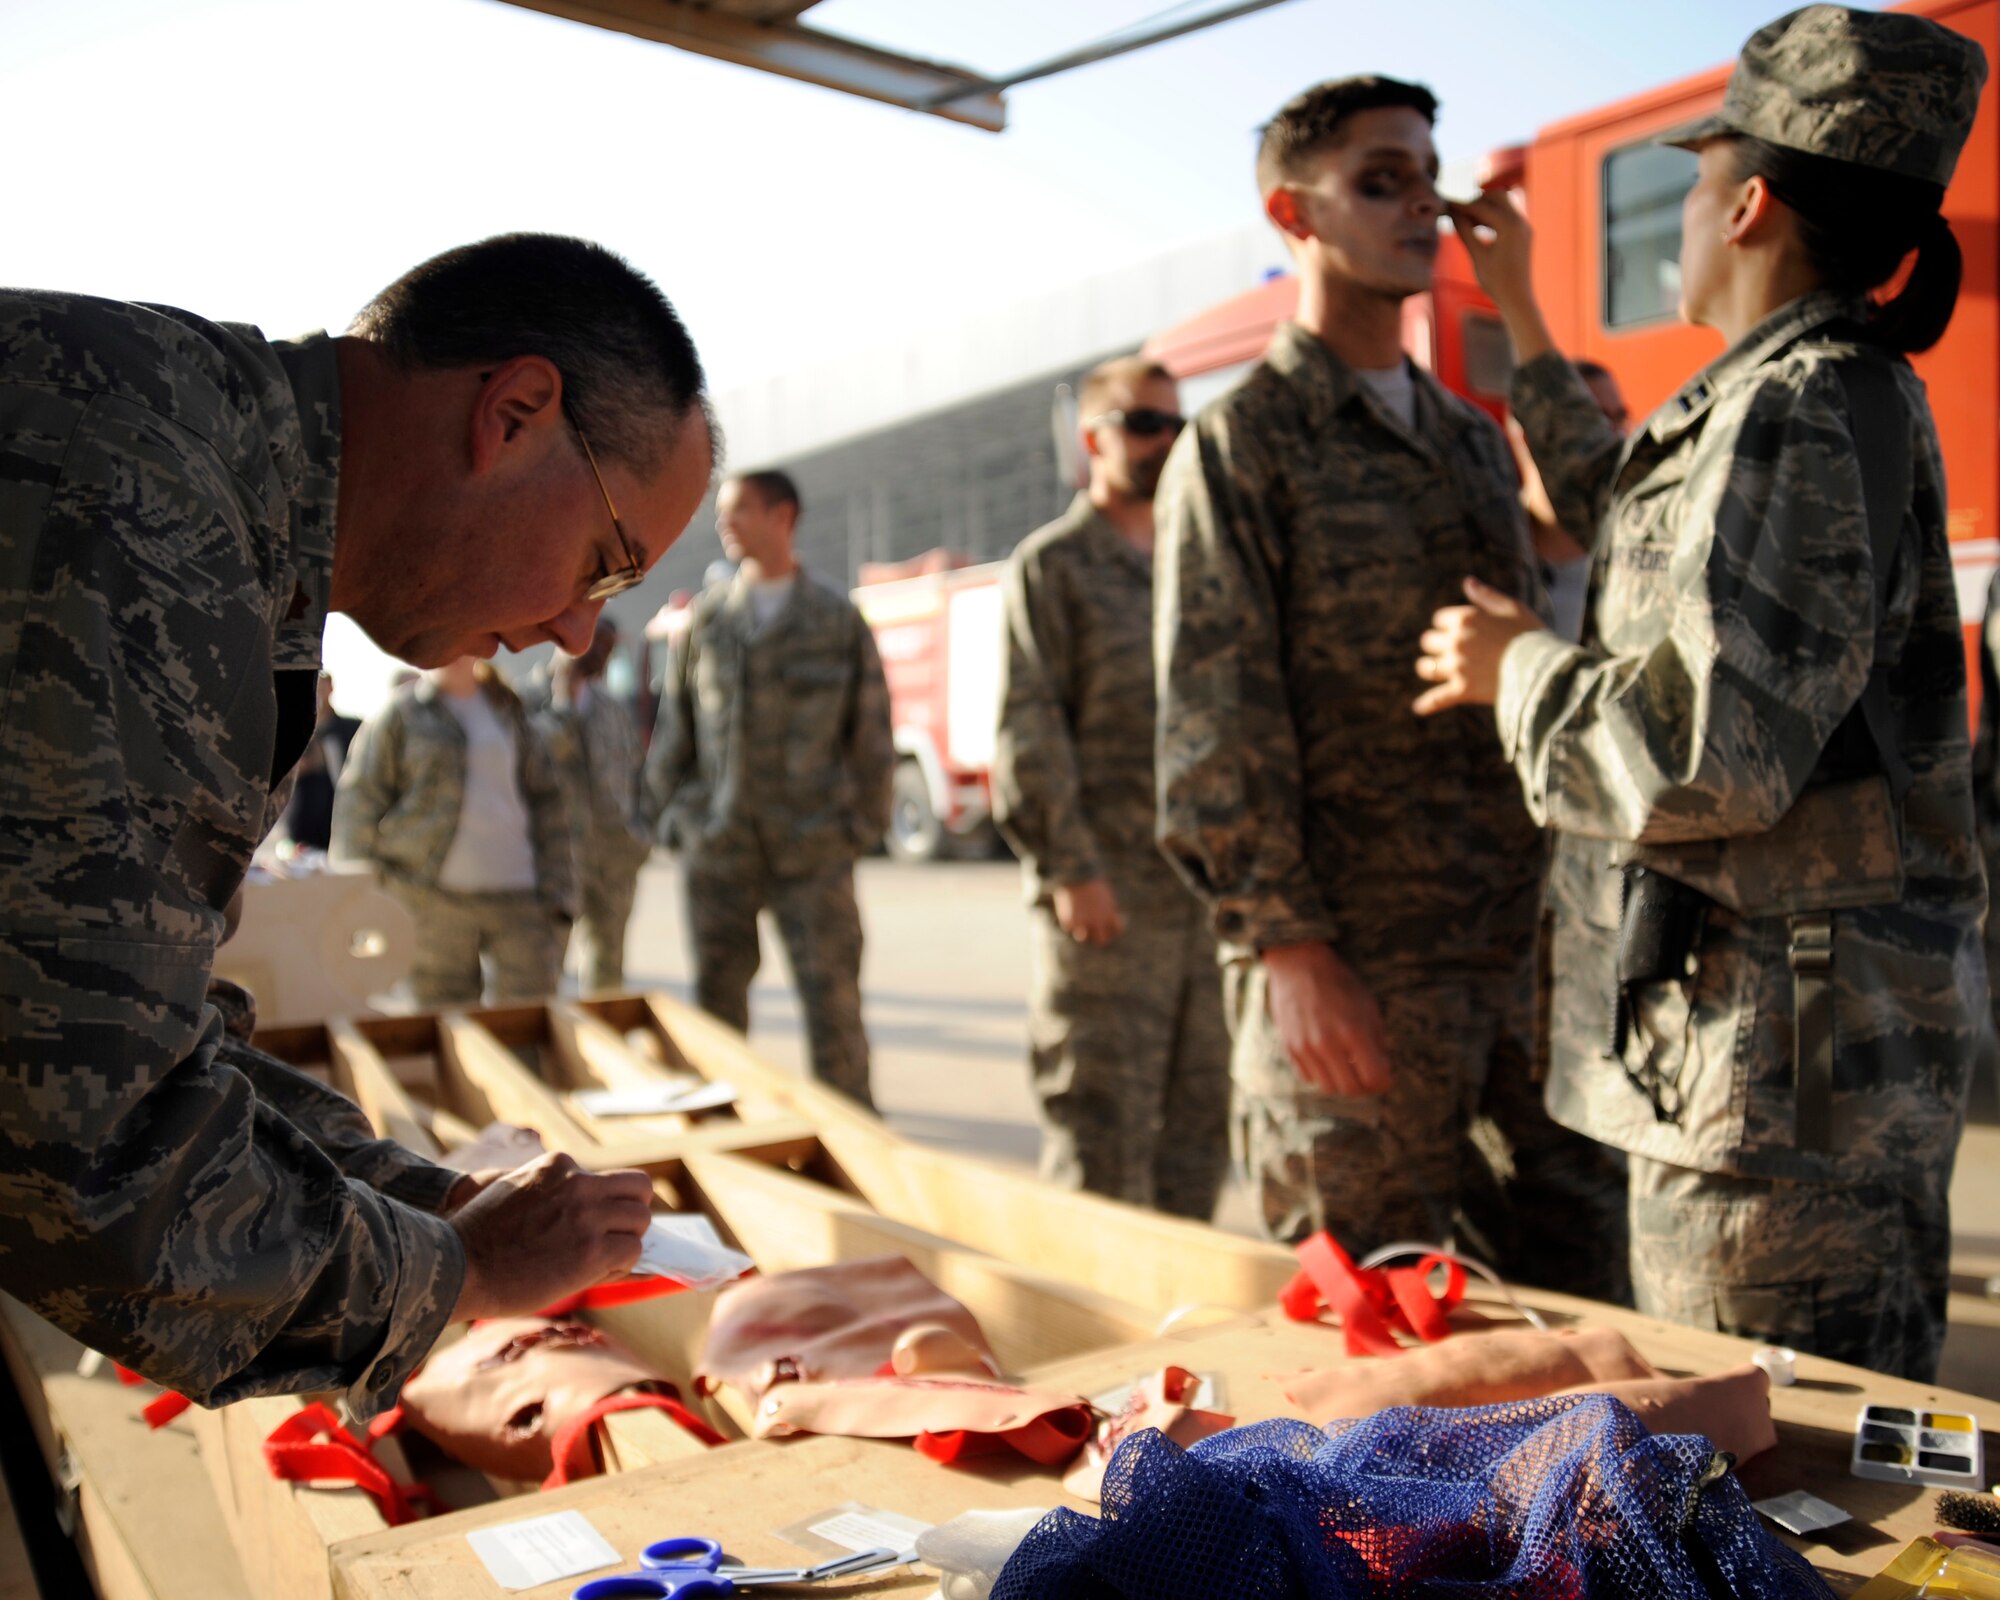 U.S. Air Force Major Christopher Hammond, chief nurse for the 447th Expeditionary Medical Squadron, sorts wounded cards while Capt. Sunny Holden, chief medical advisor for the 321st Air Expeditionary Advisory Squadron, applies moulage to mock accident casualty Senior Airman Jeremy Fazely, a ground radio technician with the 447th Air Expeditionary Communications Squadron, at New Al-Muthana Air Base, Iraq on Nov. 21, 2008. The preparation is for a major accident response exercise involving U.S. and Iraqi forces. (U.S. Air Force photo/Staff Sgt. Paul Villanueva II)